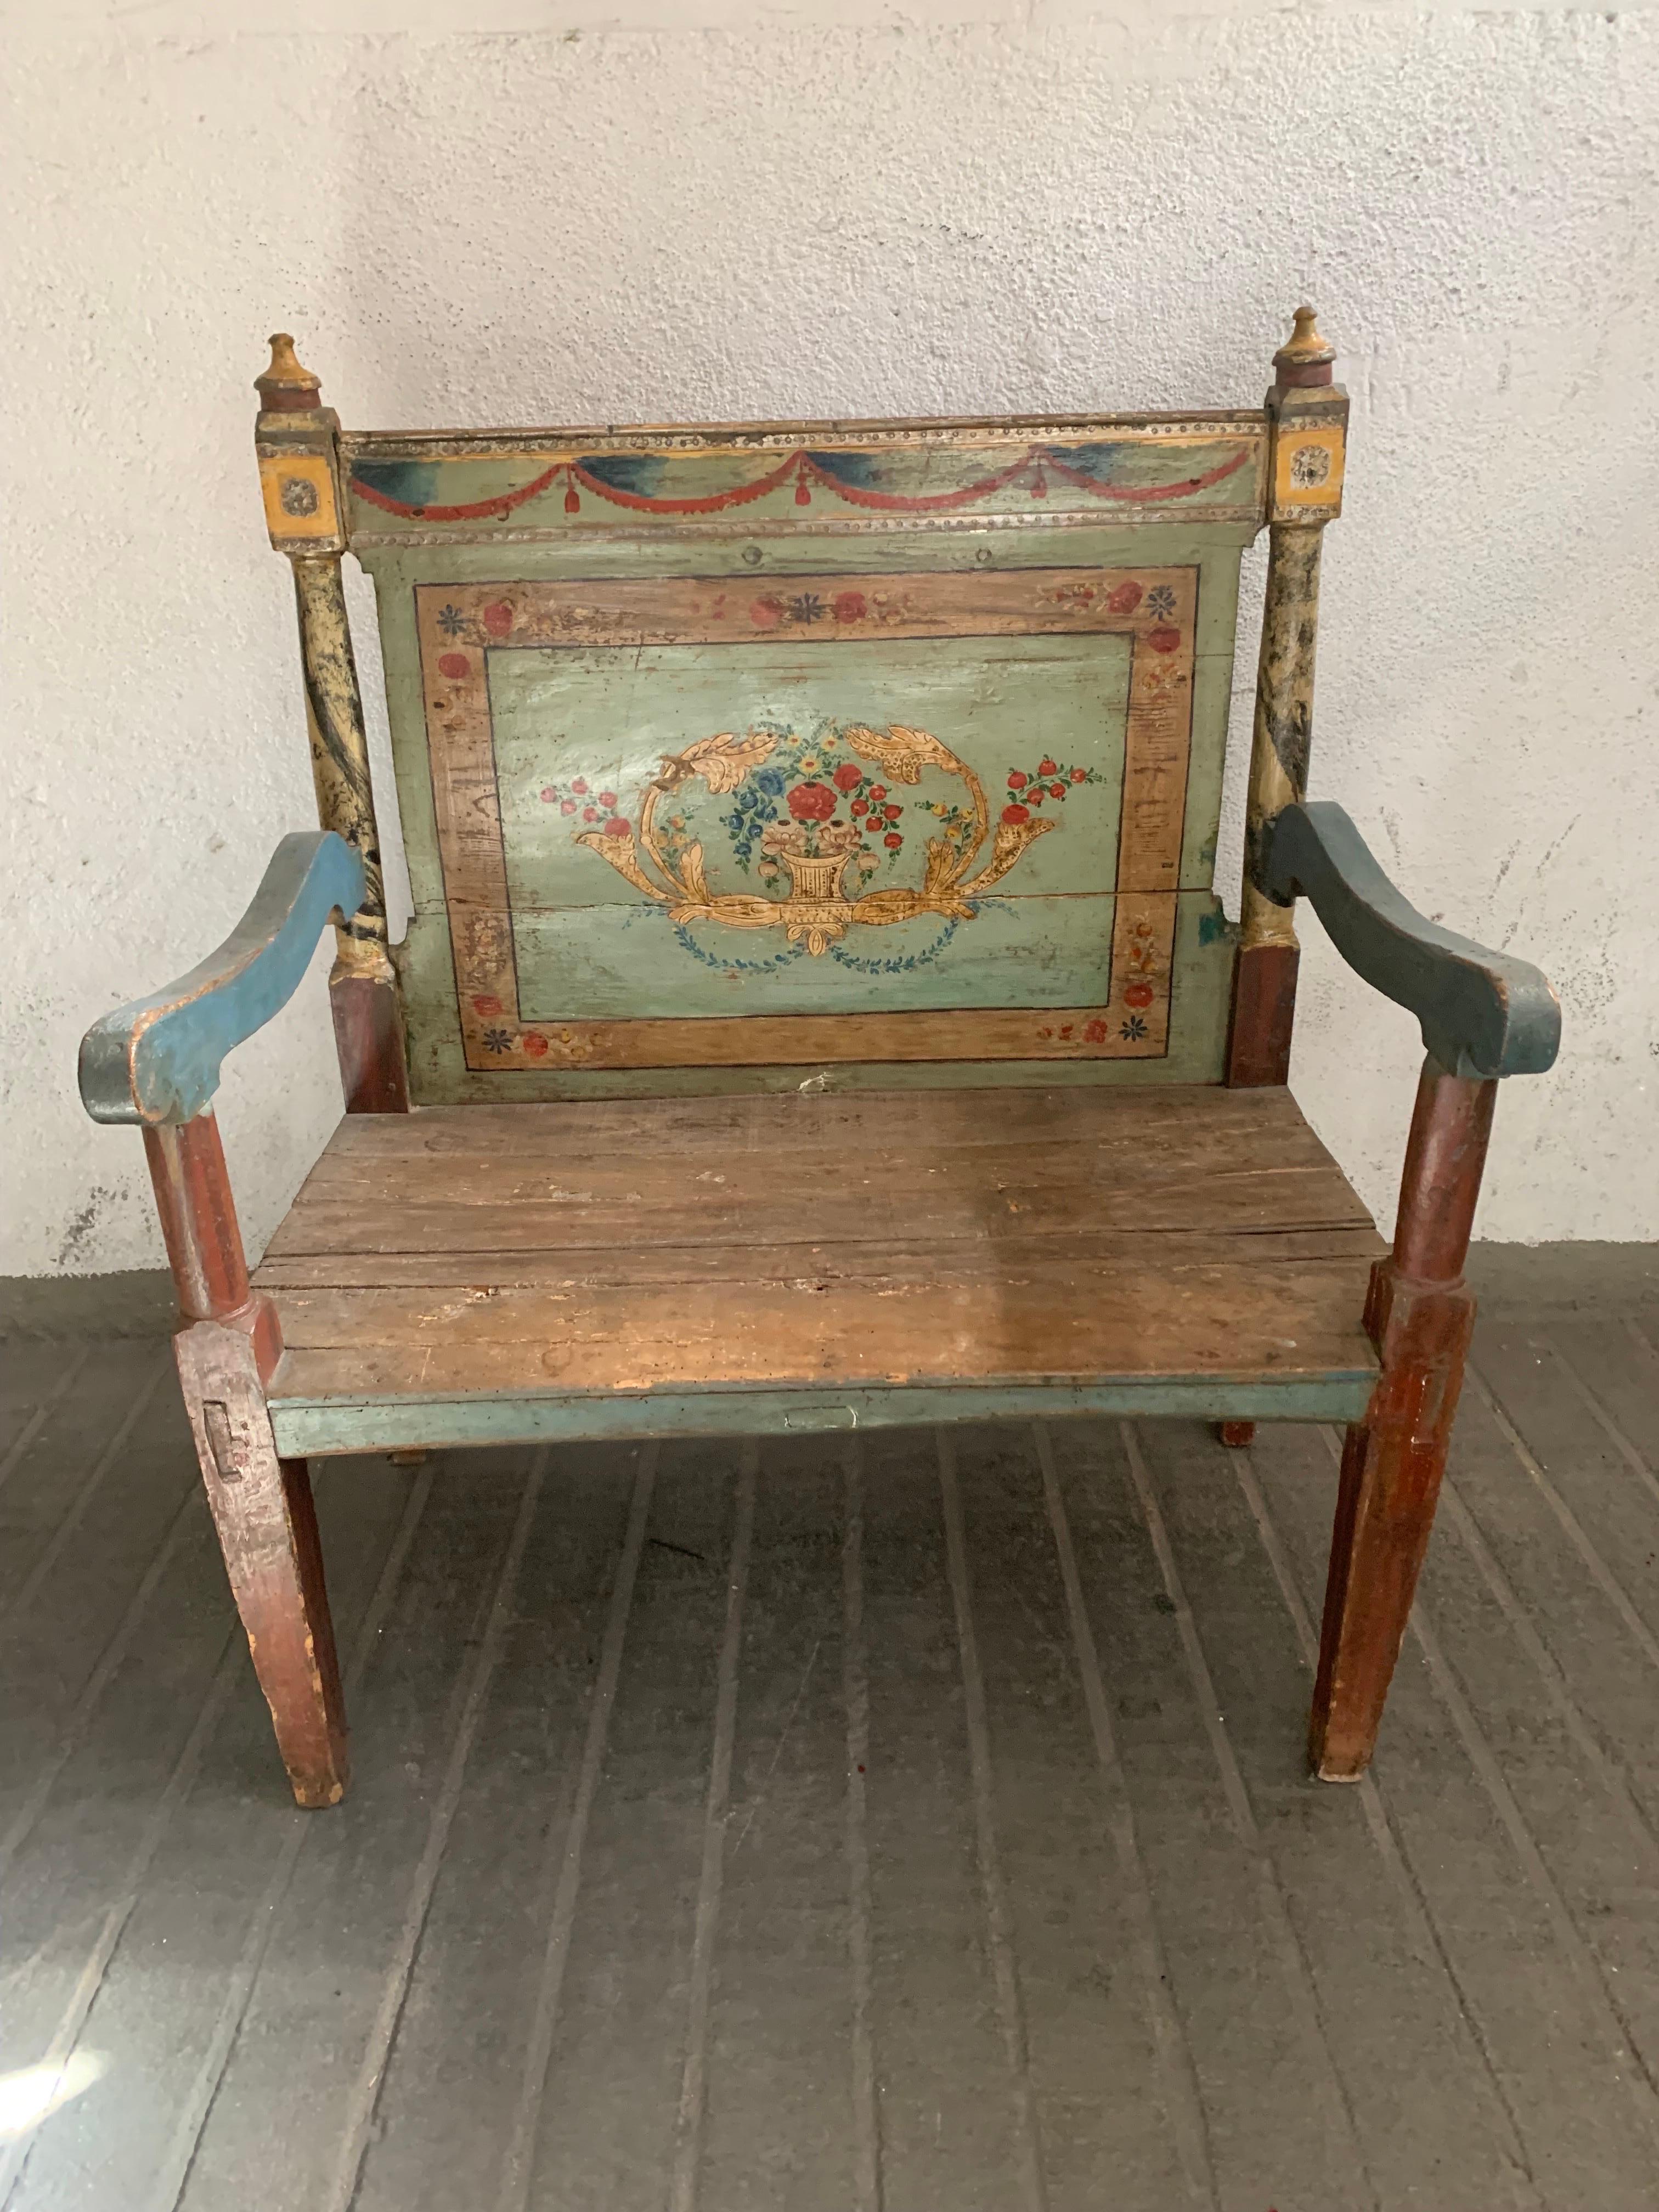 A beautiful bench in rustic style from the beginning of the 19th century, probably from the Aragon area, the backrest has a profusely decorated hand-painted backrest, garlands of flowers and leaves are painted on the top, and in the central part of